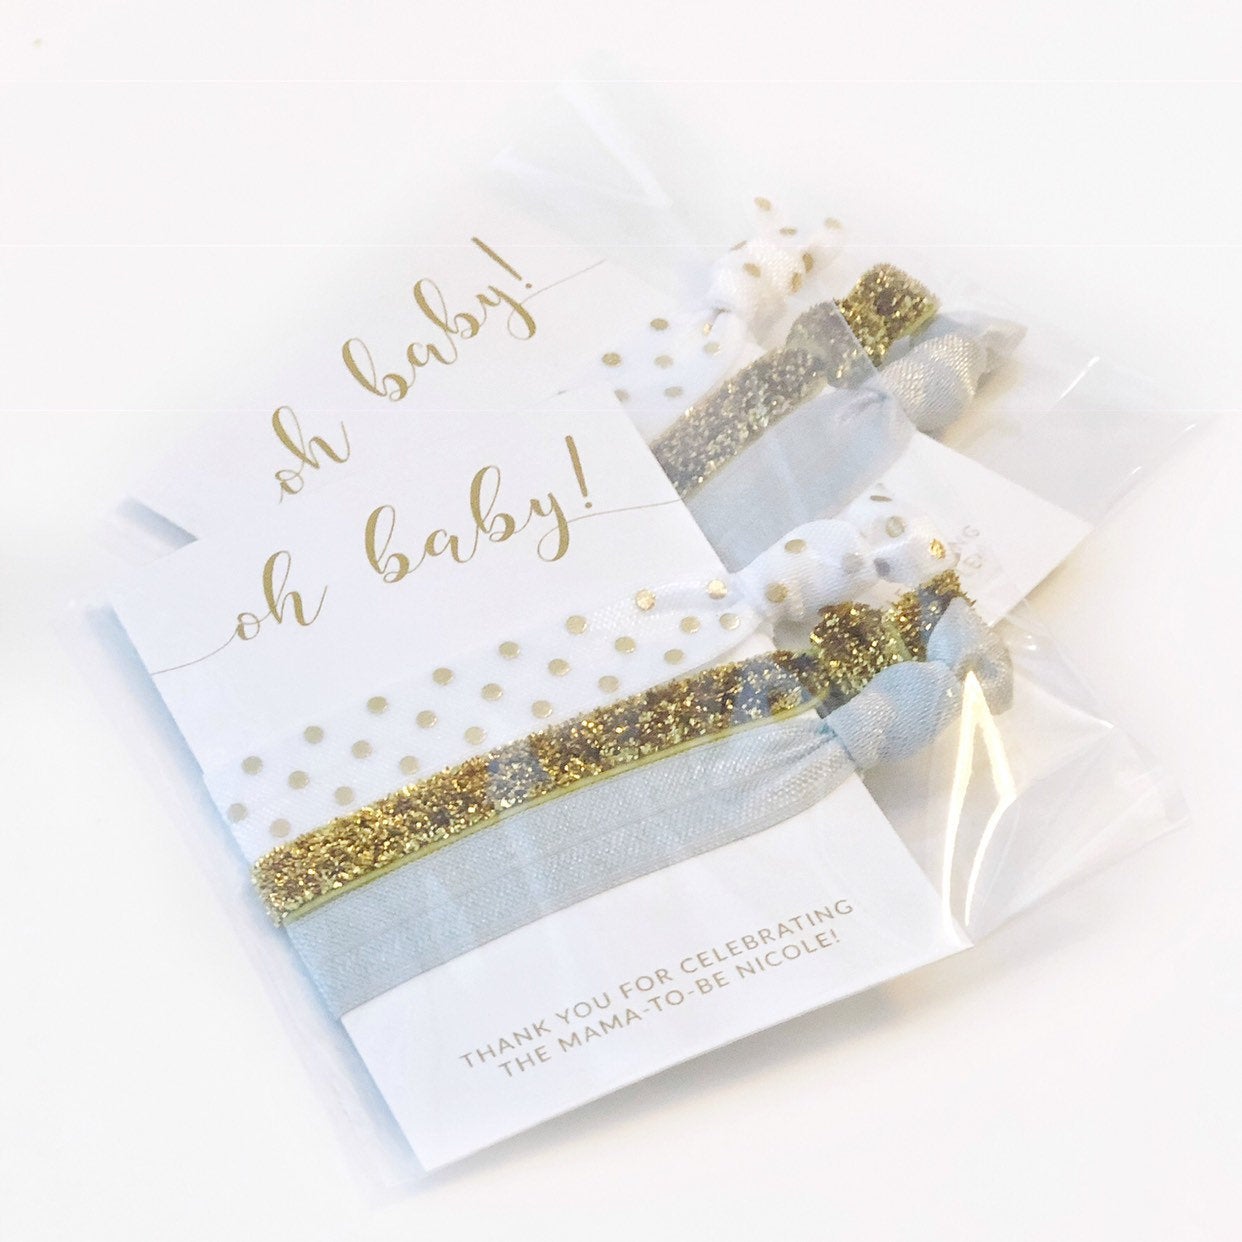 Gender Neutral Baby Shower Favors, Grey Baby Shower Favors, Unique Baby Shower Favor Hair Ties, Gold Baby Shower Decorations - @PlumPolkaDot 